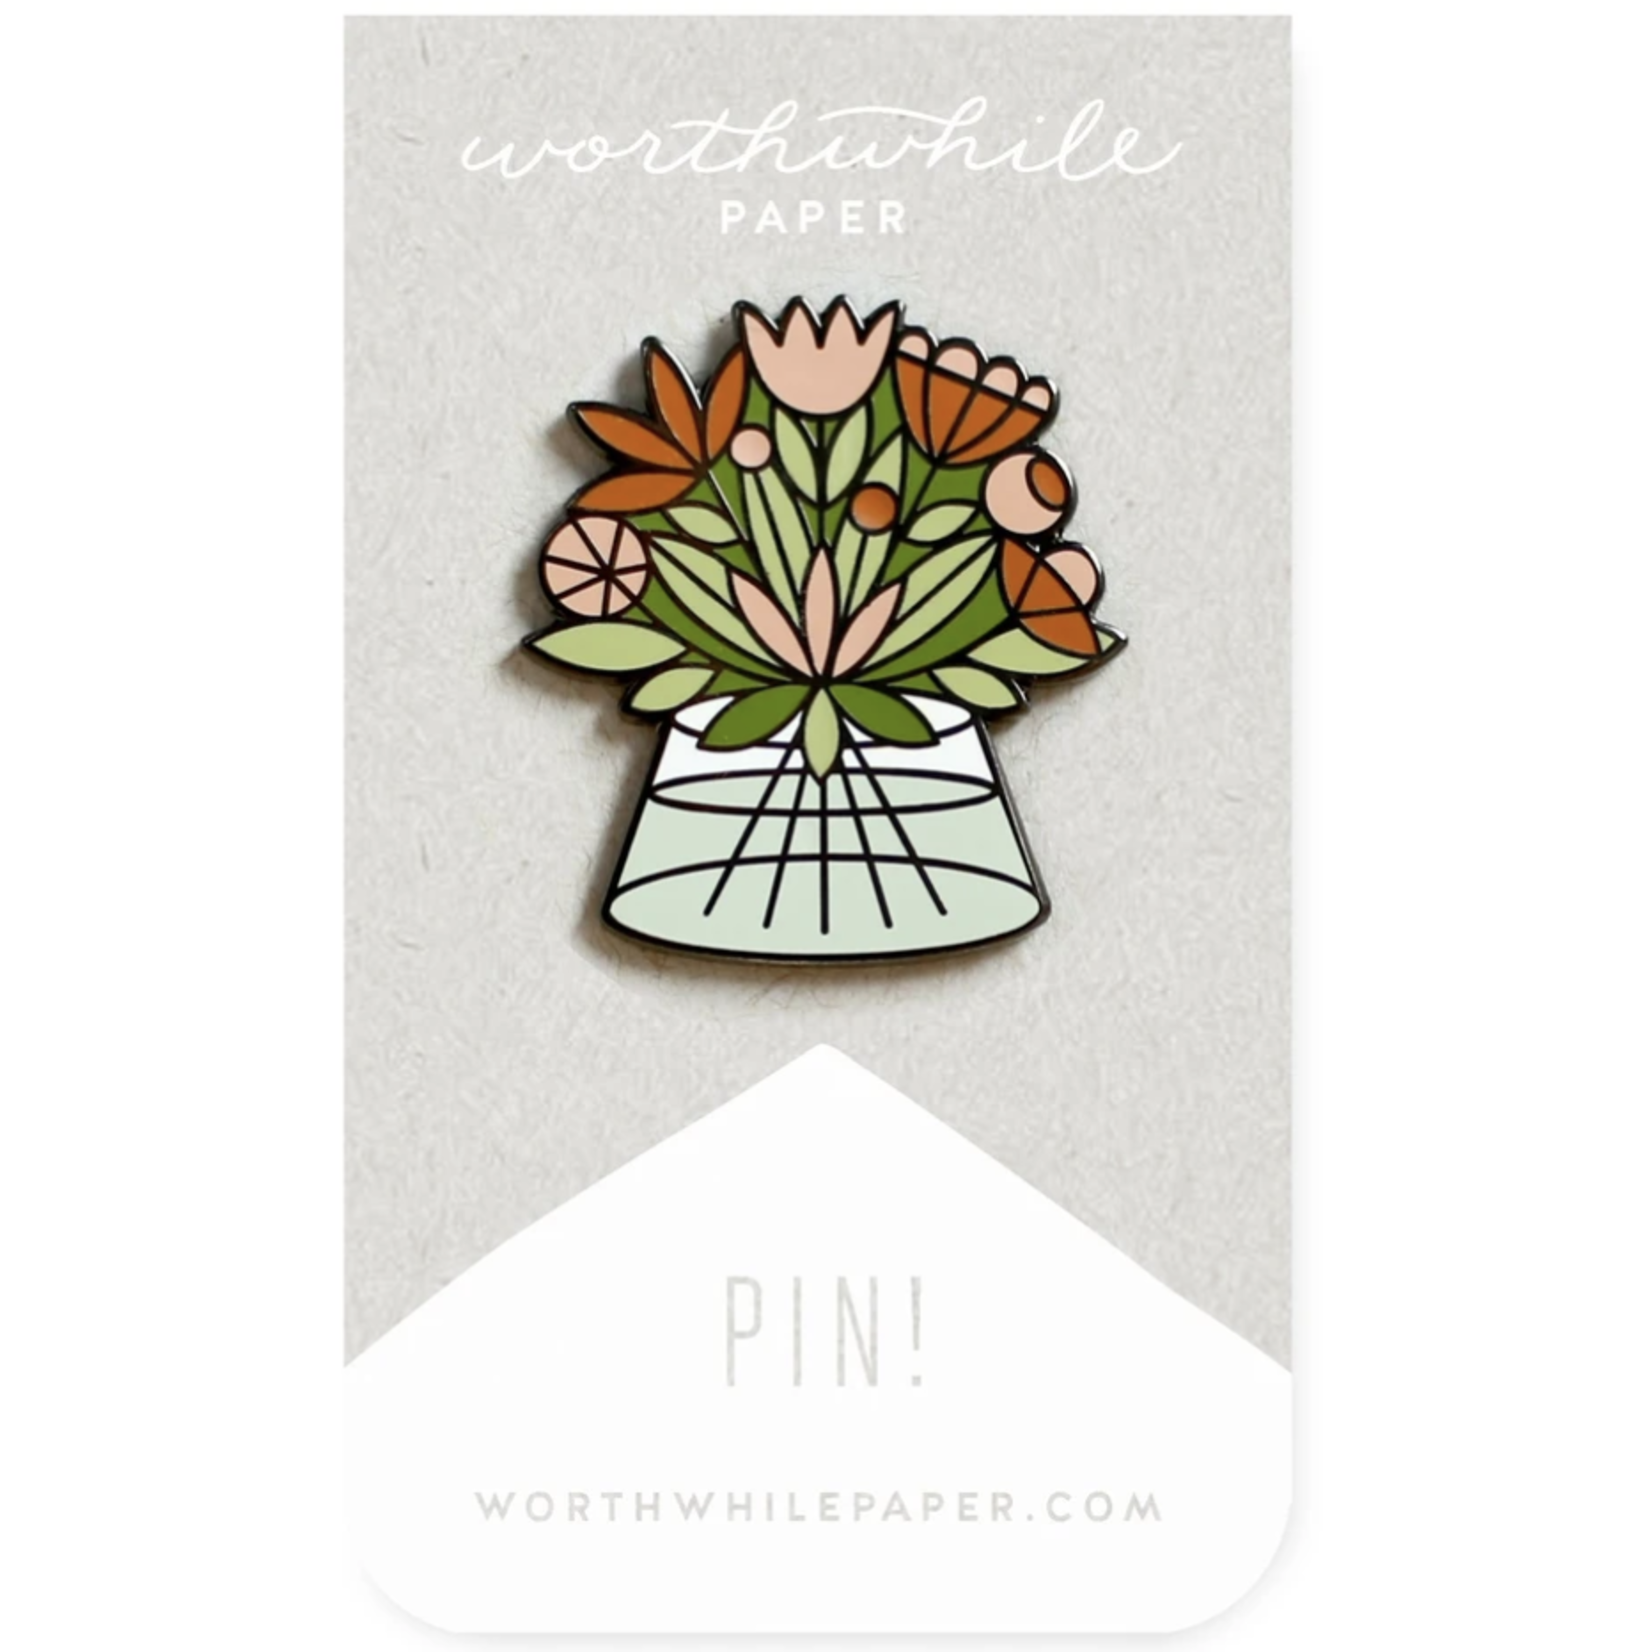 Worthwhile Paper Worthwhile Paper Enamel Pins